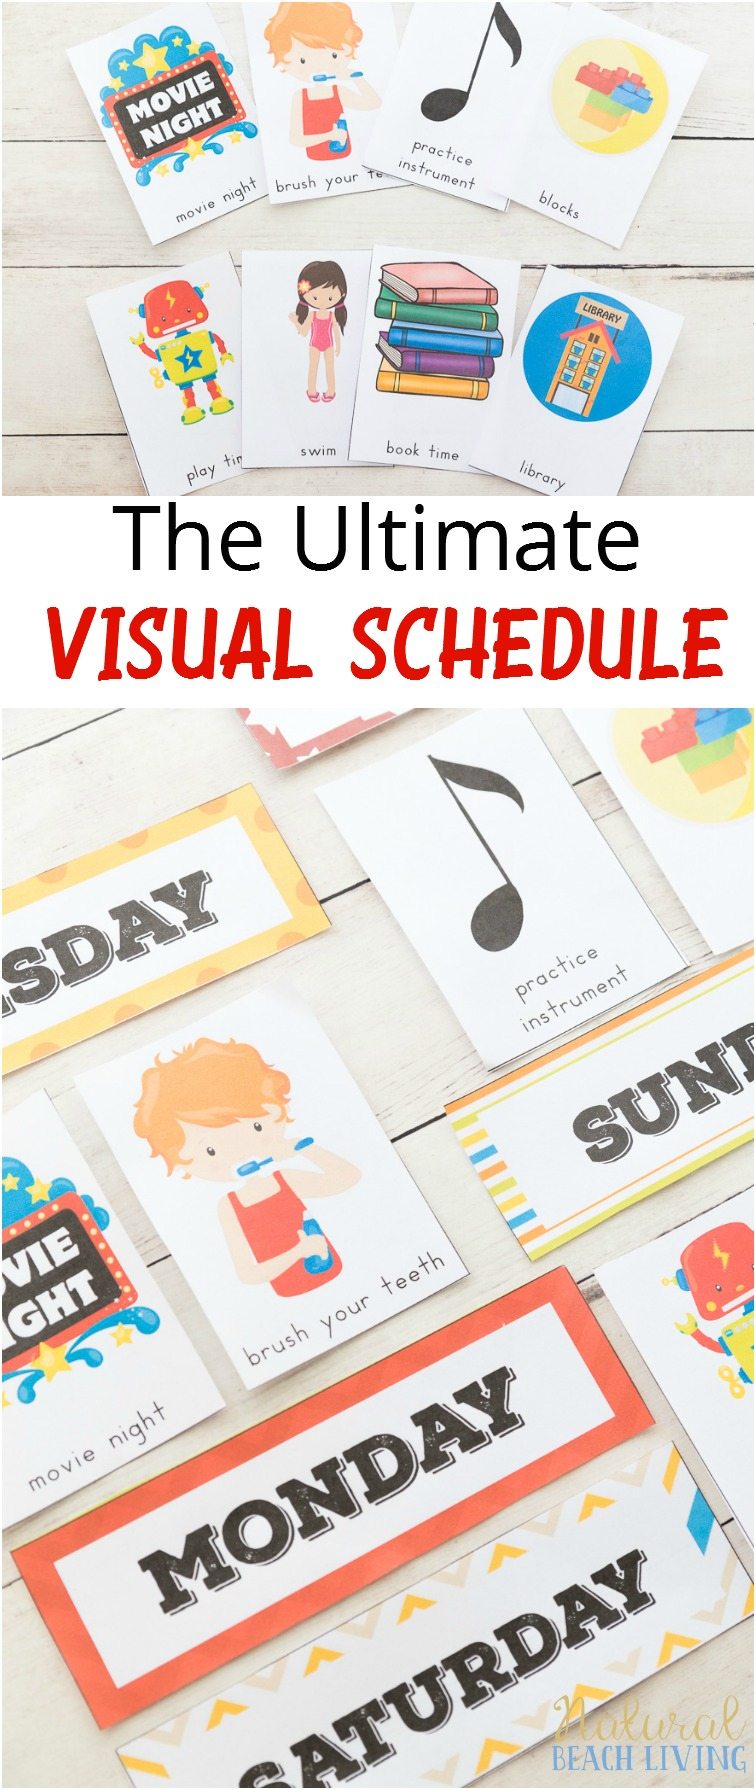 Daily Visual Schedule For Kids Free Printable - Natural Beach Living - Free Printable Visual Schedule For Preschool